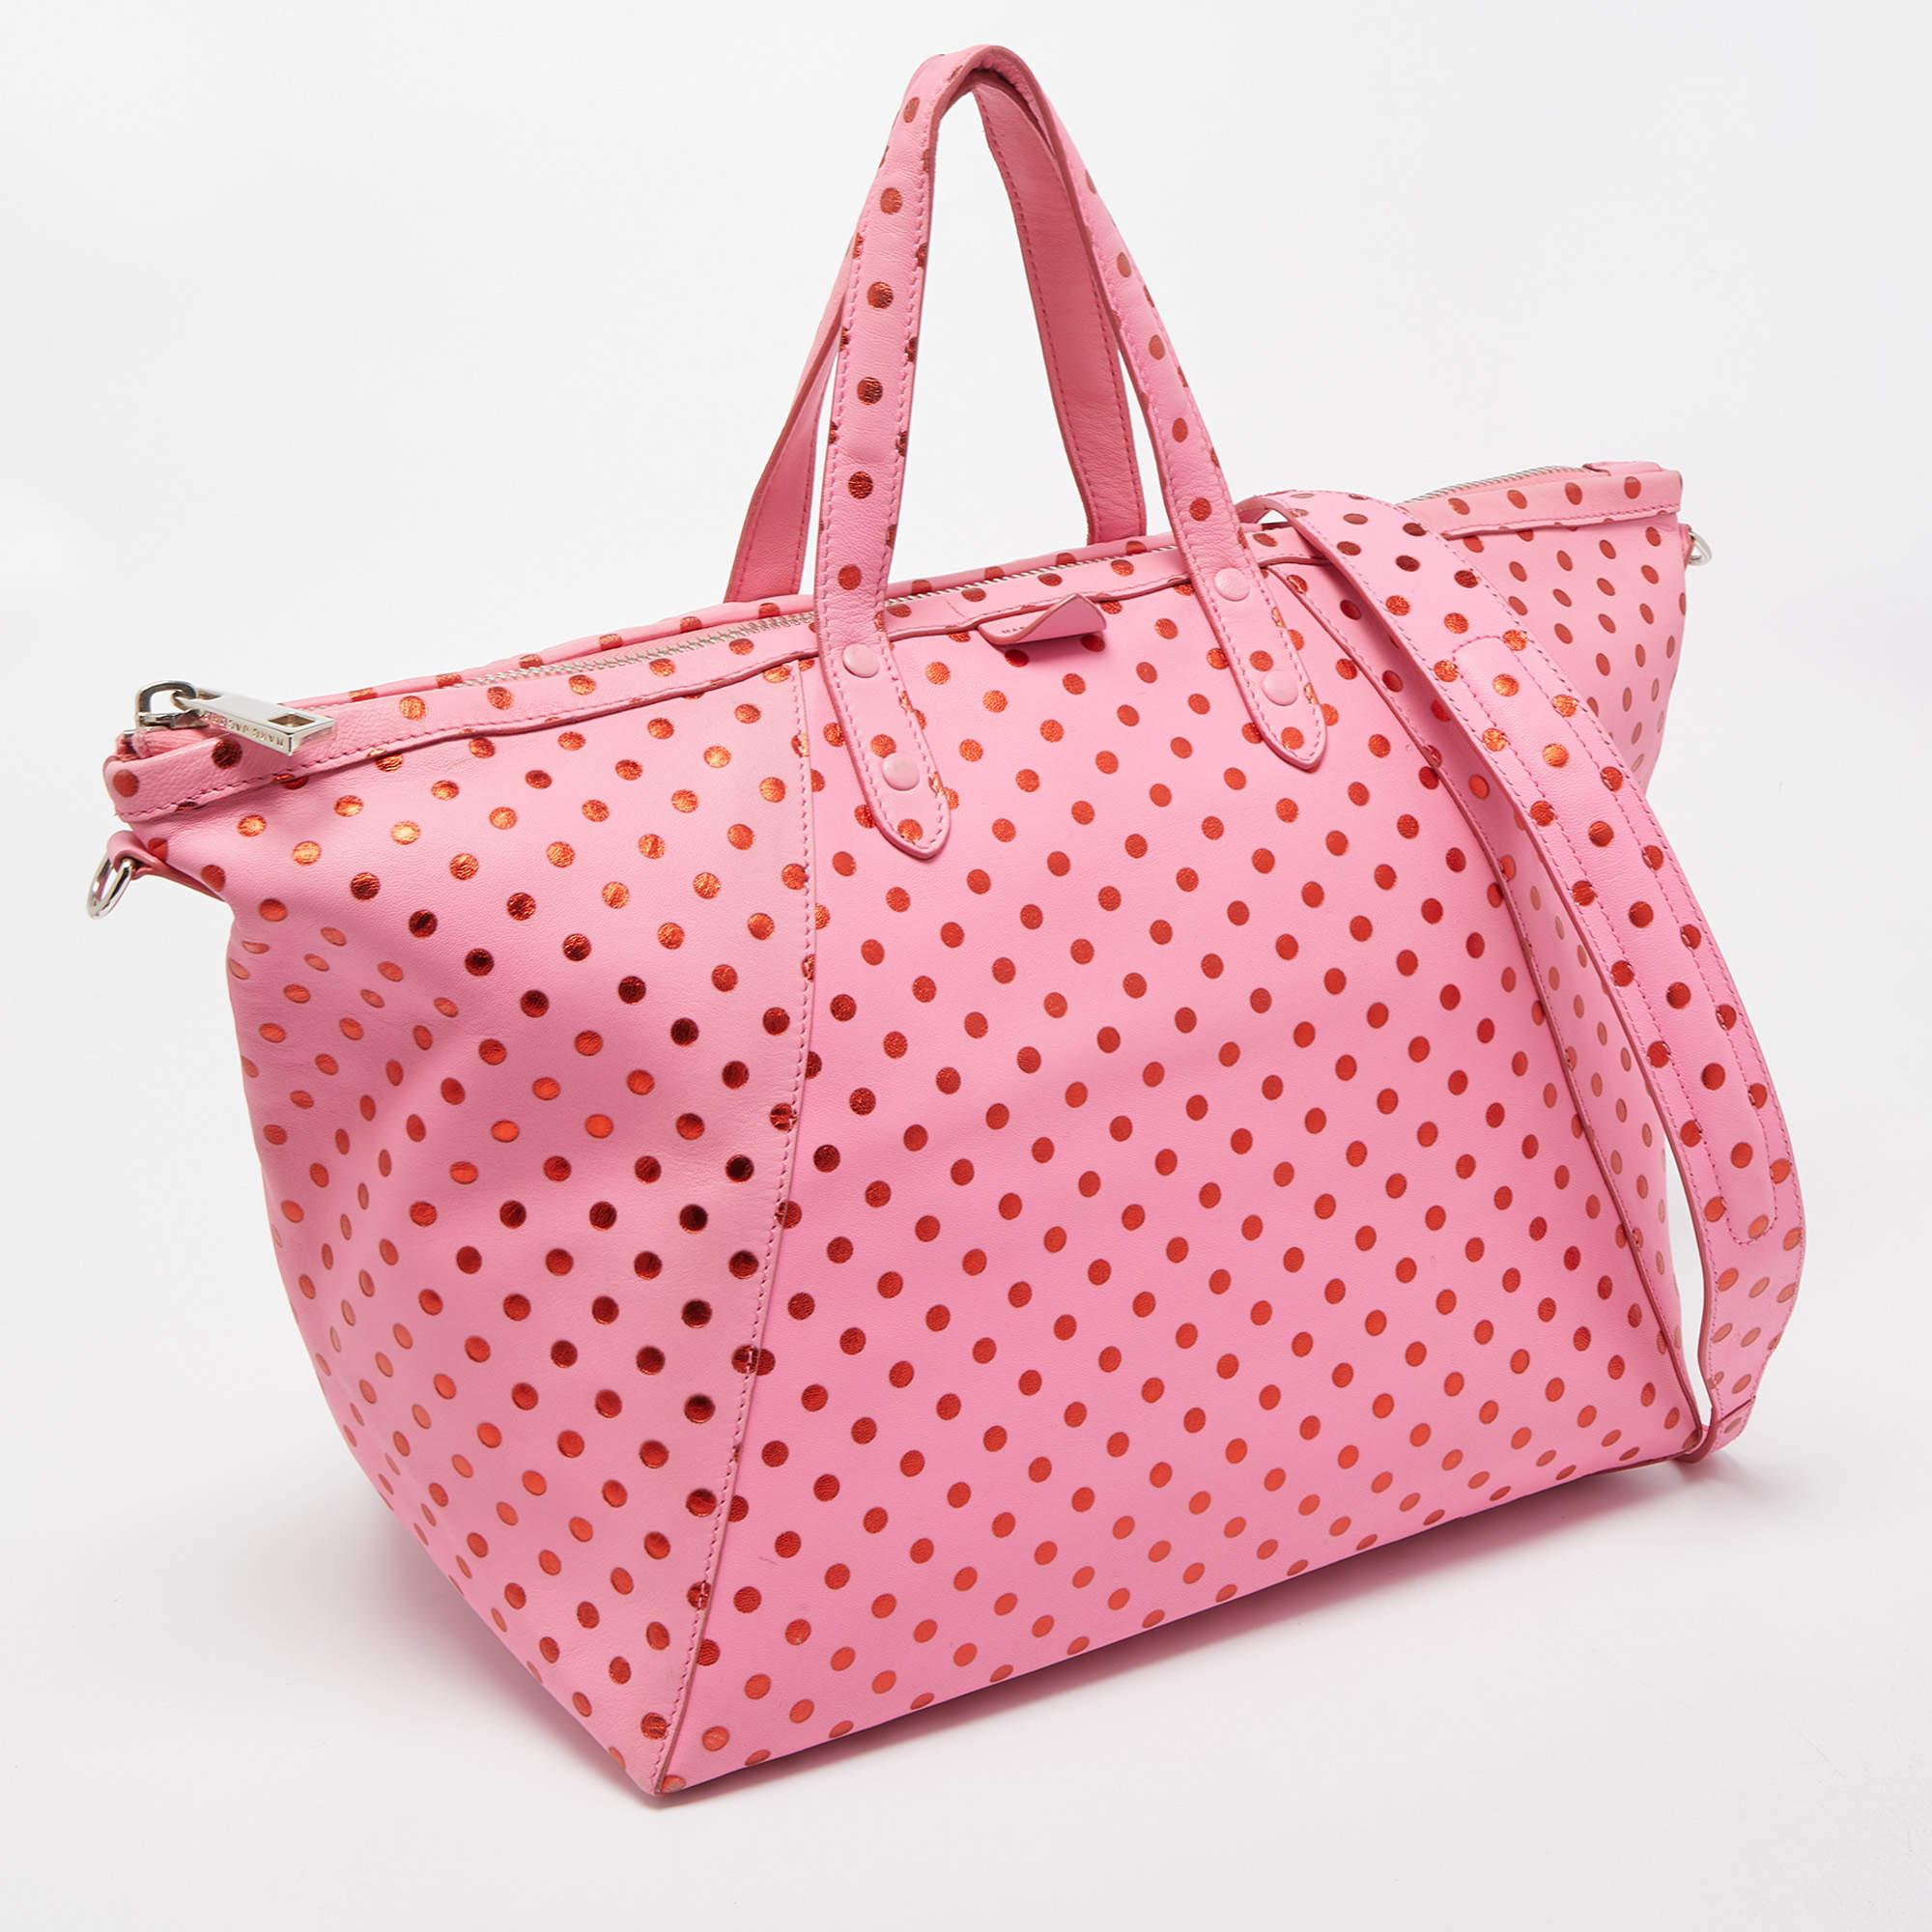 Women's Marc Jacobs Pink Leather Polka Dot Zip Tote For Sale